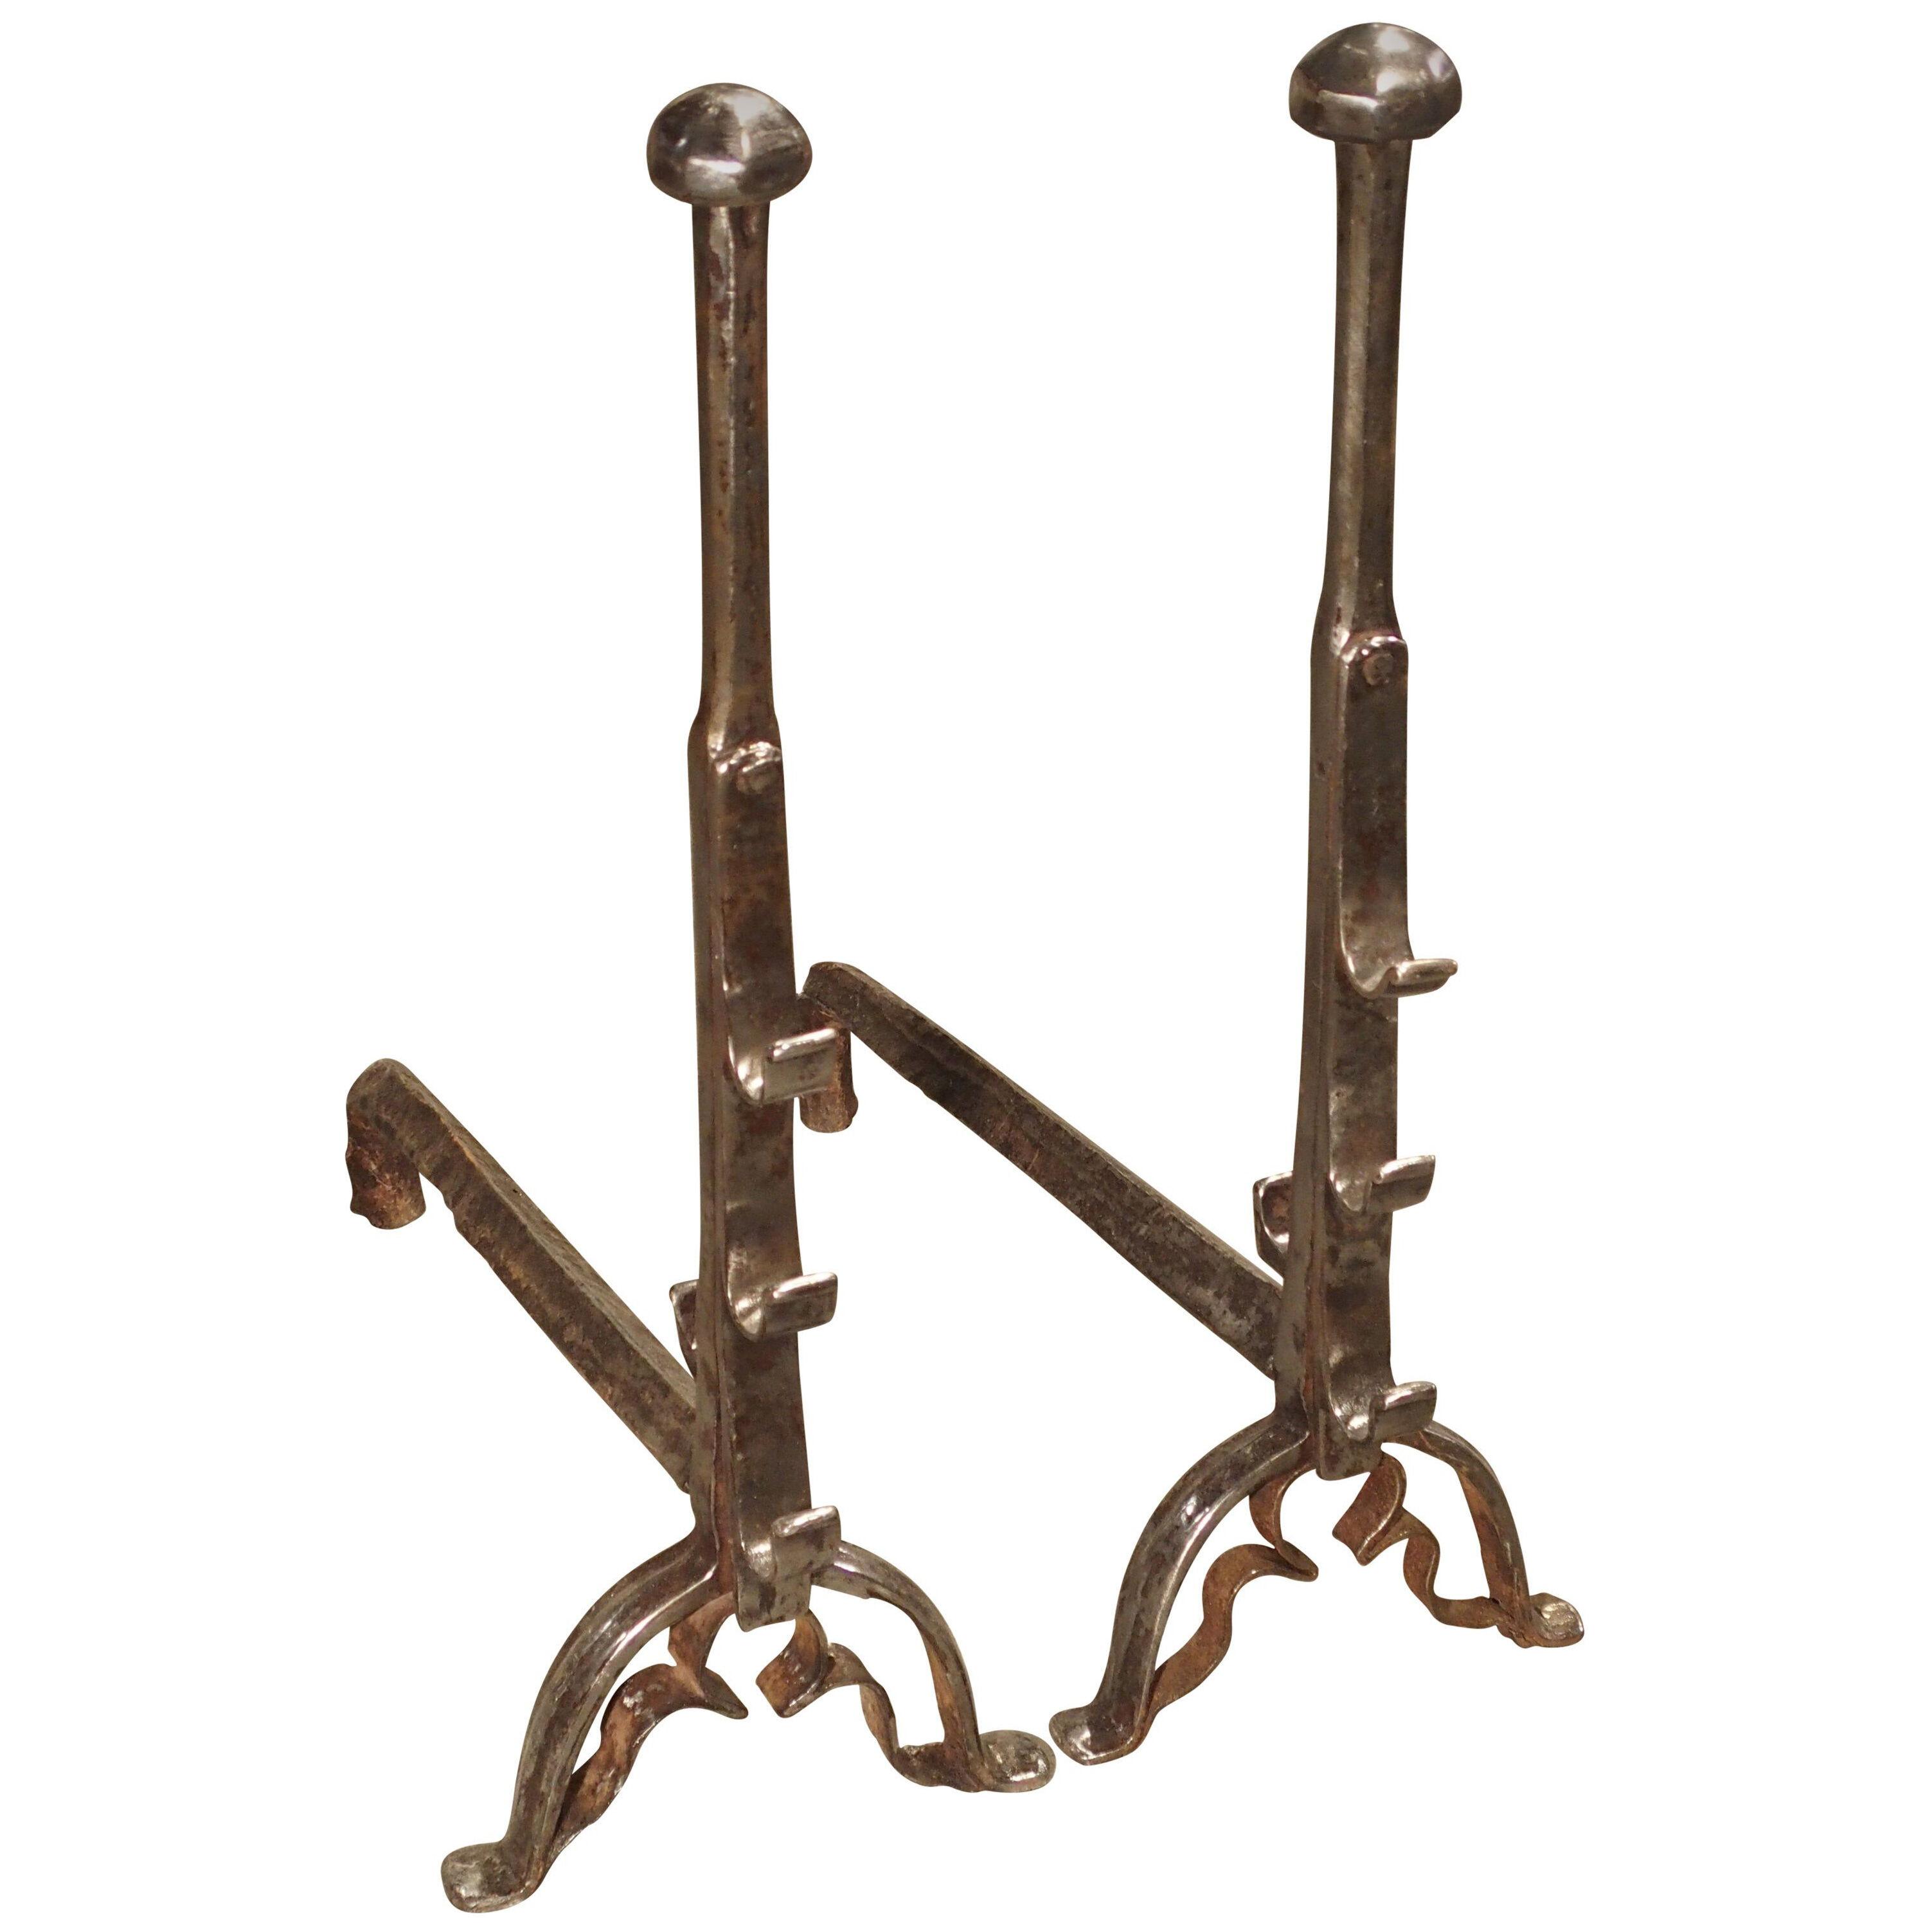 Pair of Antique French Andirons, Forged in 17th Century